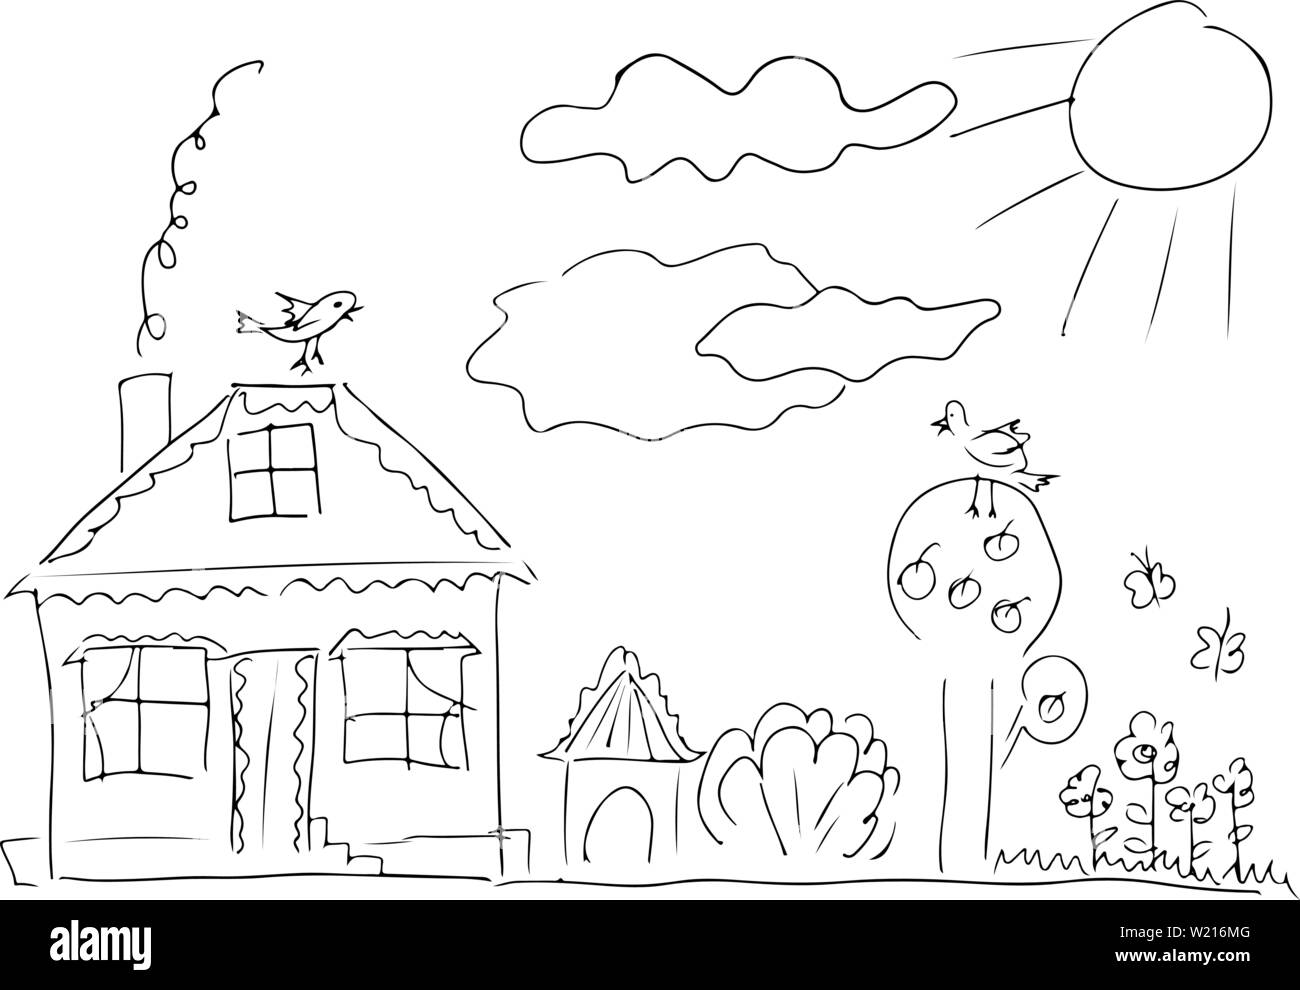 Sketch of countryside house surrounded by trees. Hand drawn vector illustration. Line art. Stock Vector